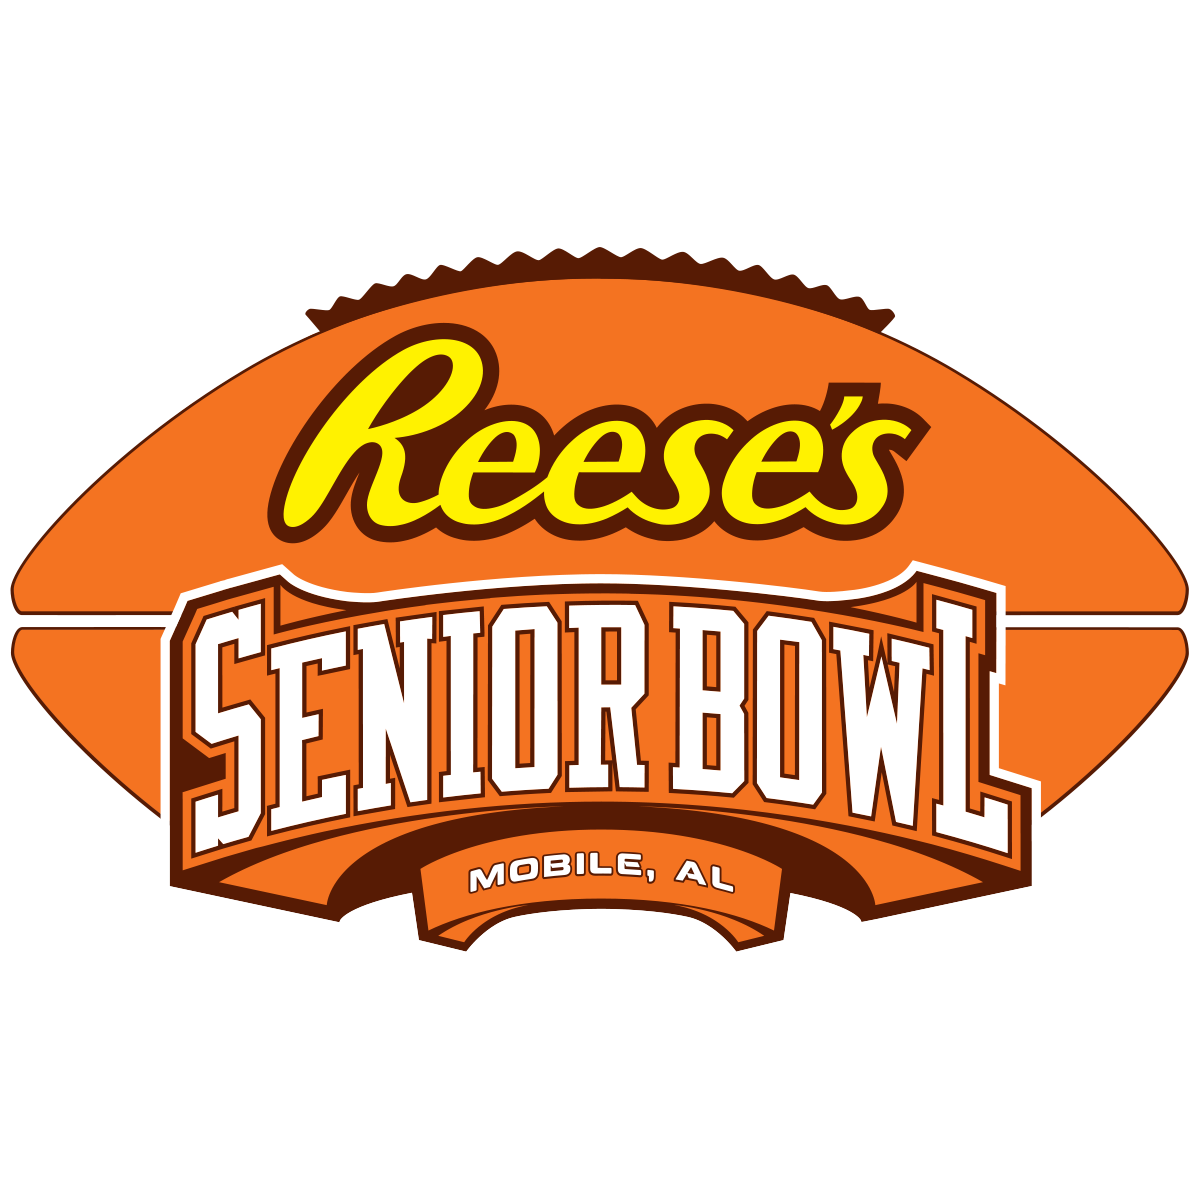 Senior Bowl reveals the DBs that Lions coach Shaun Dion Hamilton will have in Mobile